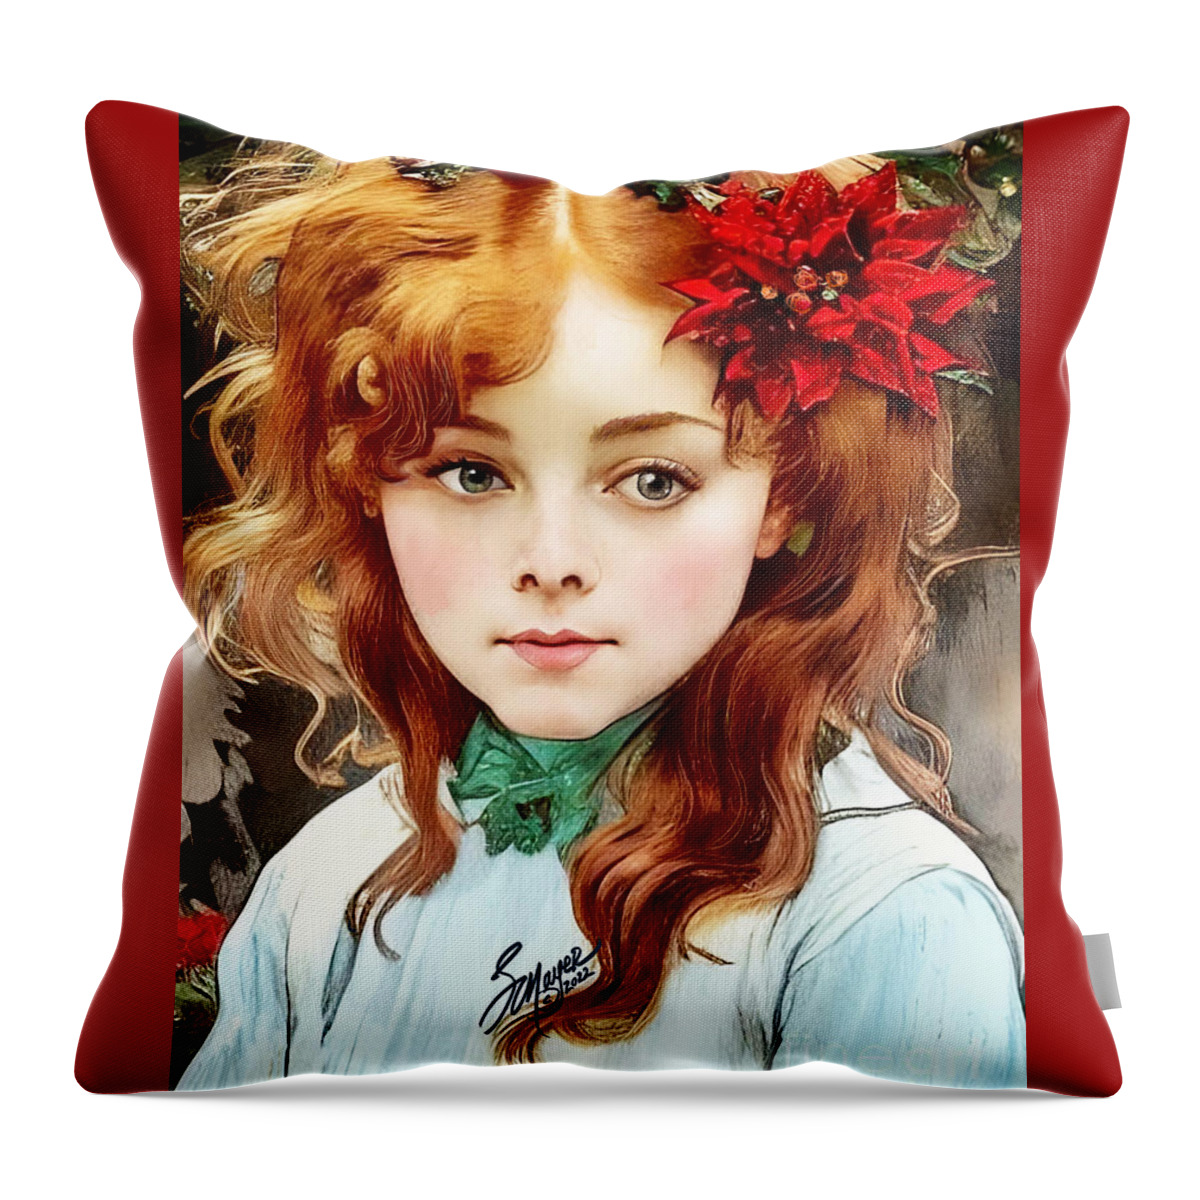 Christmas Art Throw Pillow featuring the digital art Christmas Girl by Stacey Mayer